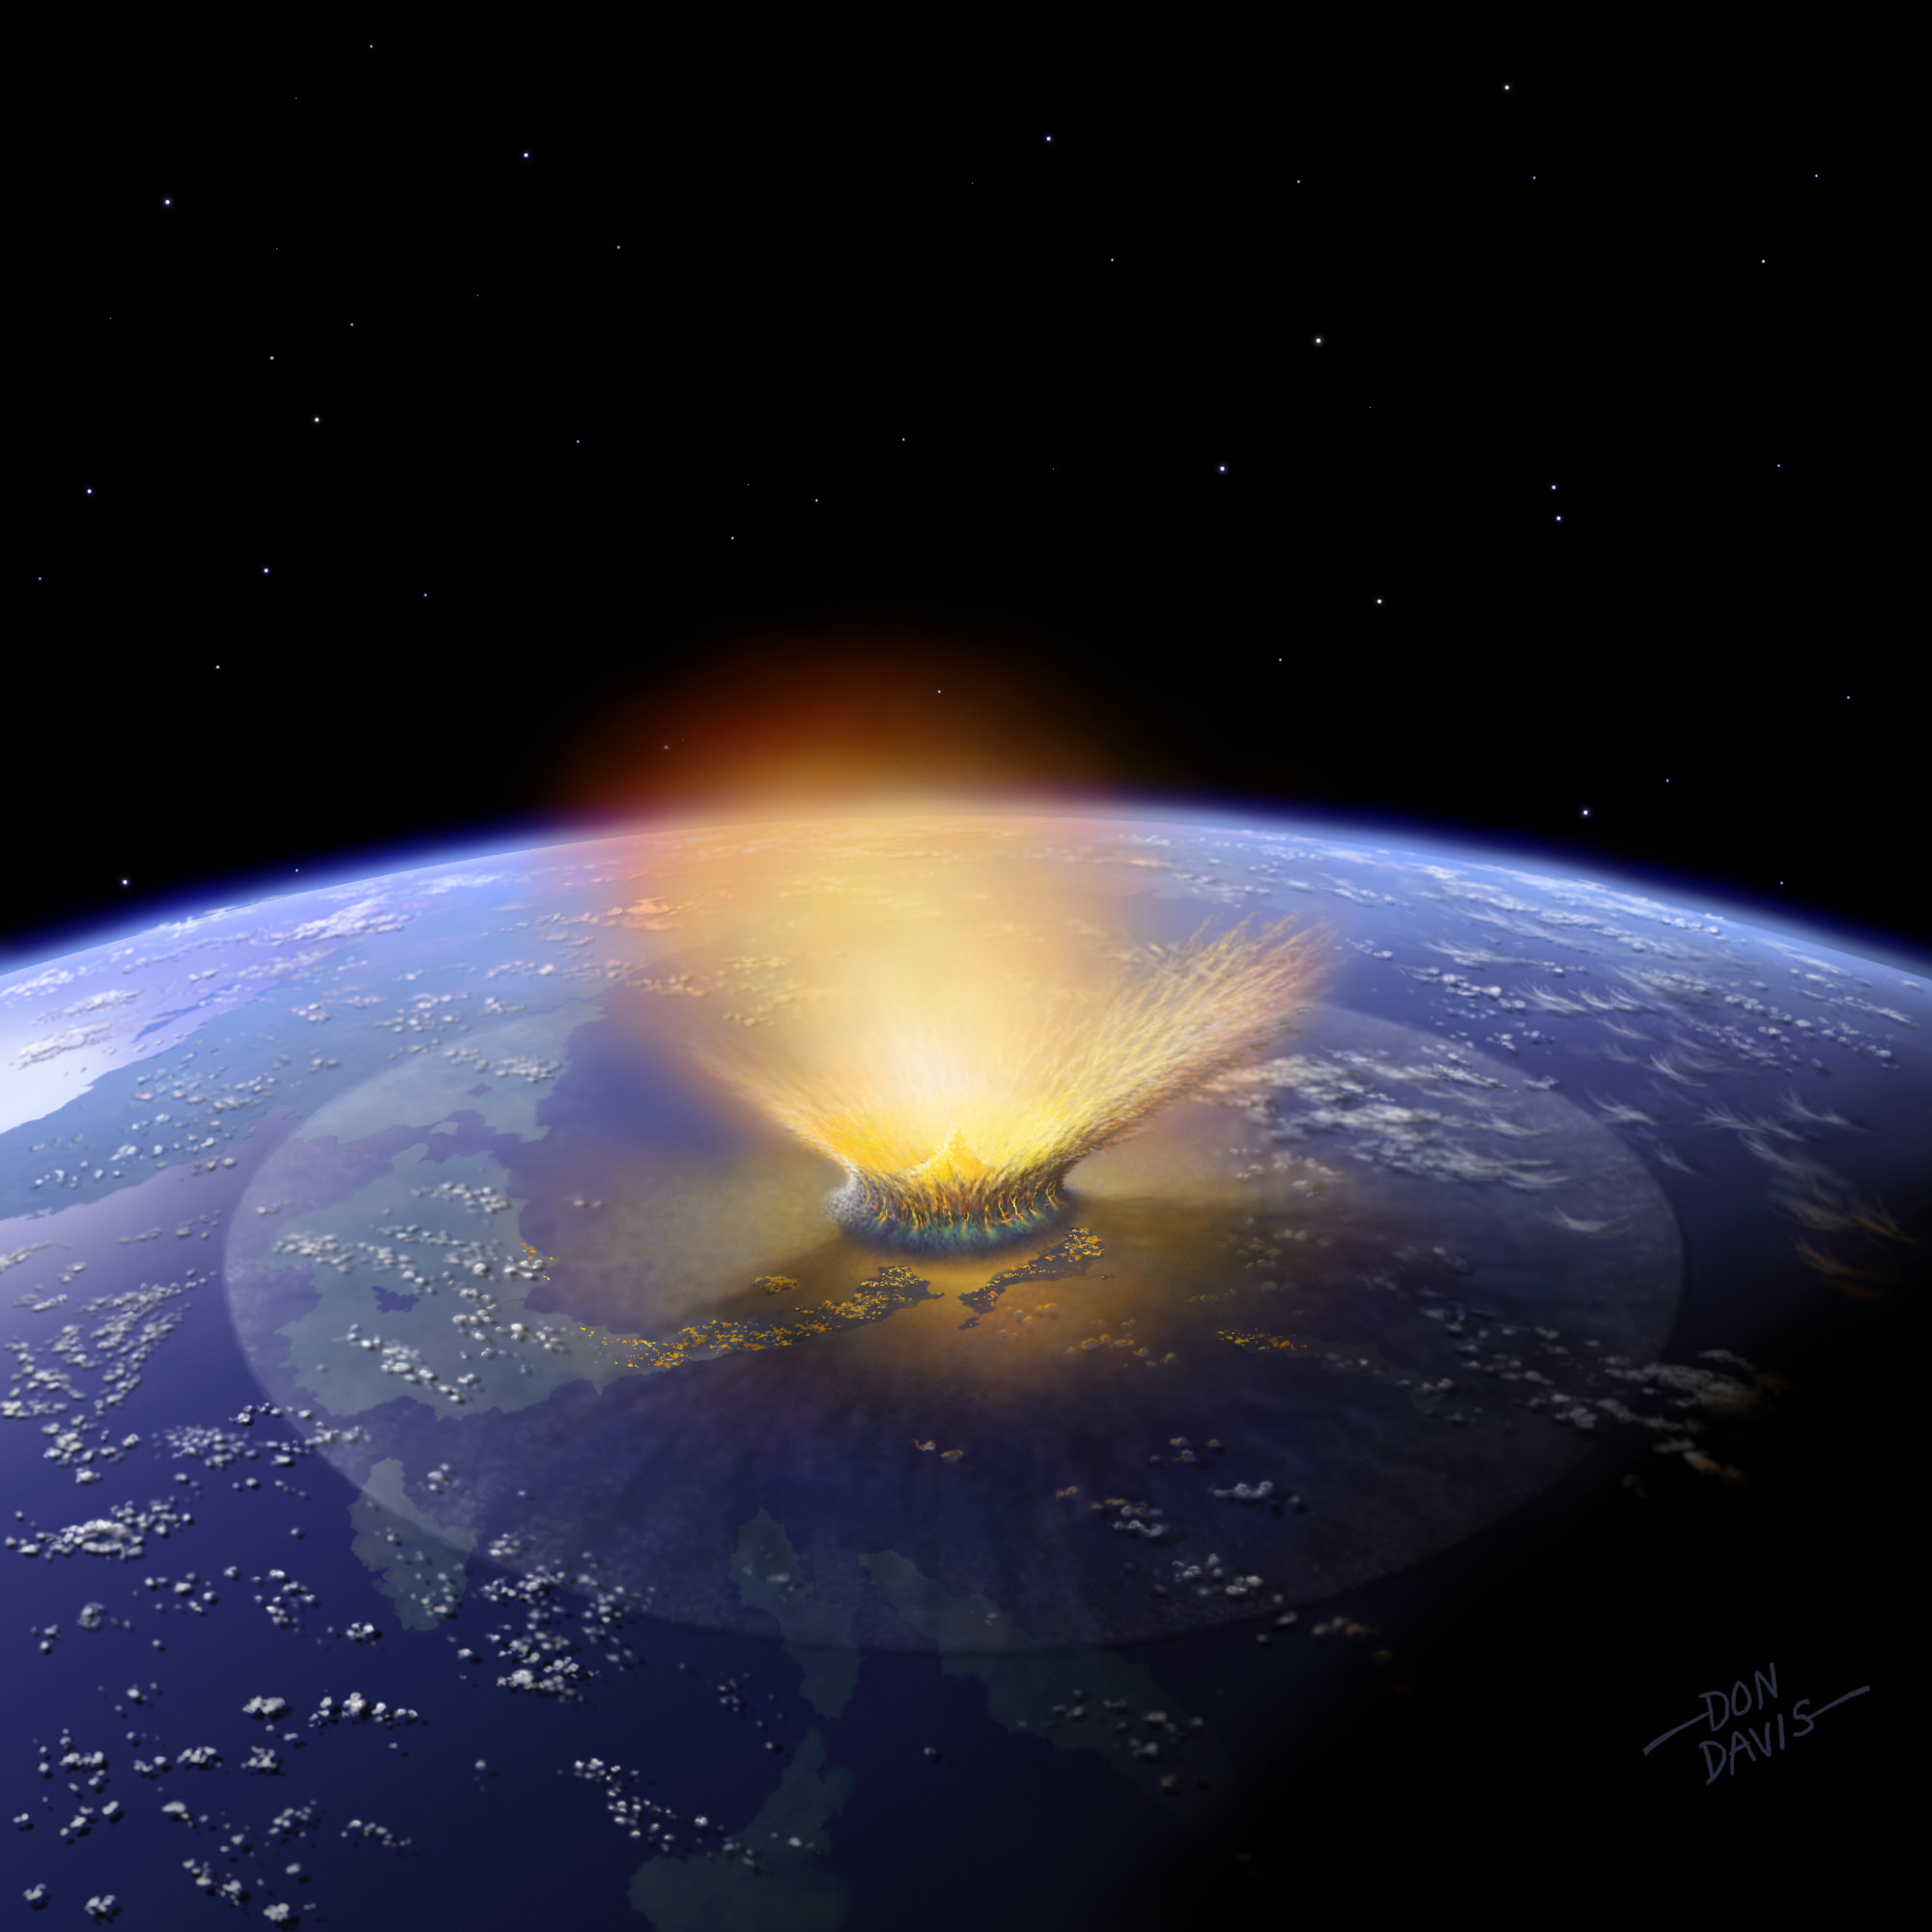 This is an artist’s depiction of a 10-kilometer (6-mile) diameter asteroid striking the Earth. New evidence in Australia suggests an asteroid 2 to 3 times larger than this struck Earth early in its life. Credit: Don Davis/Southwest Research Institute.